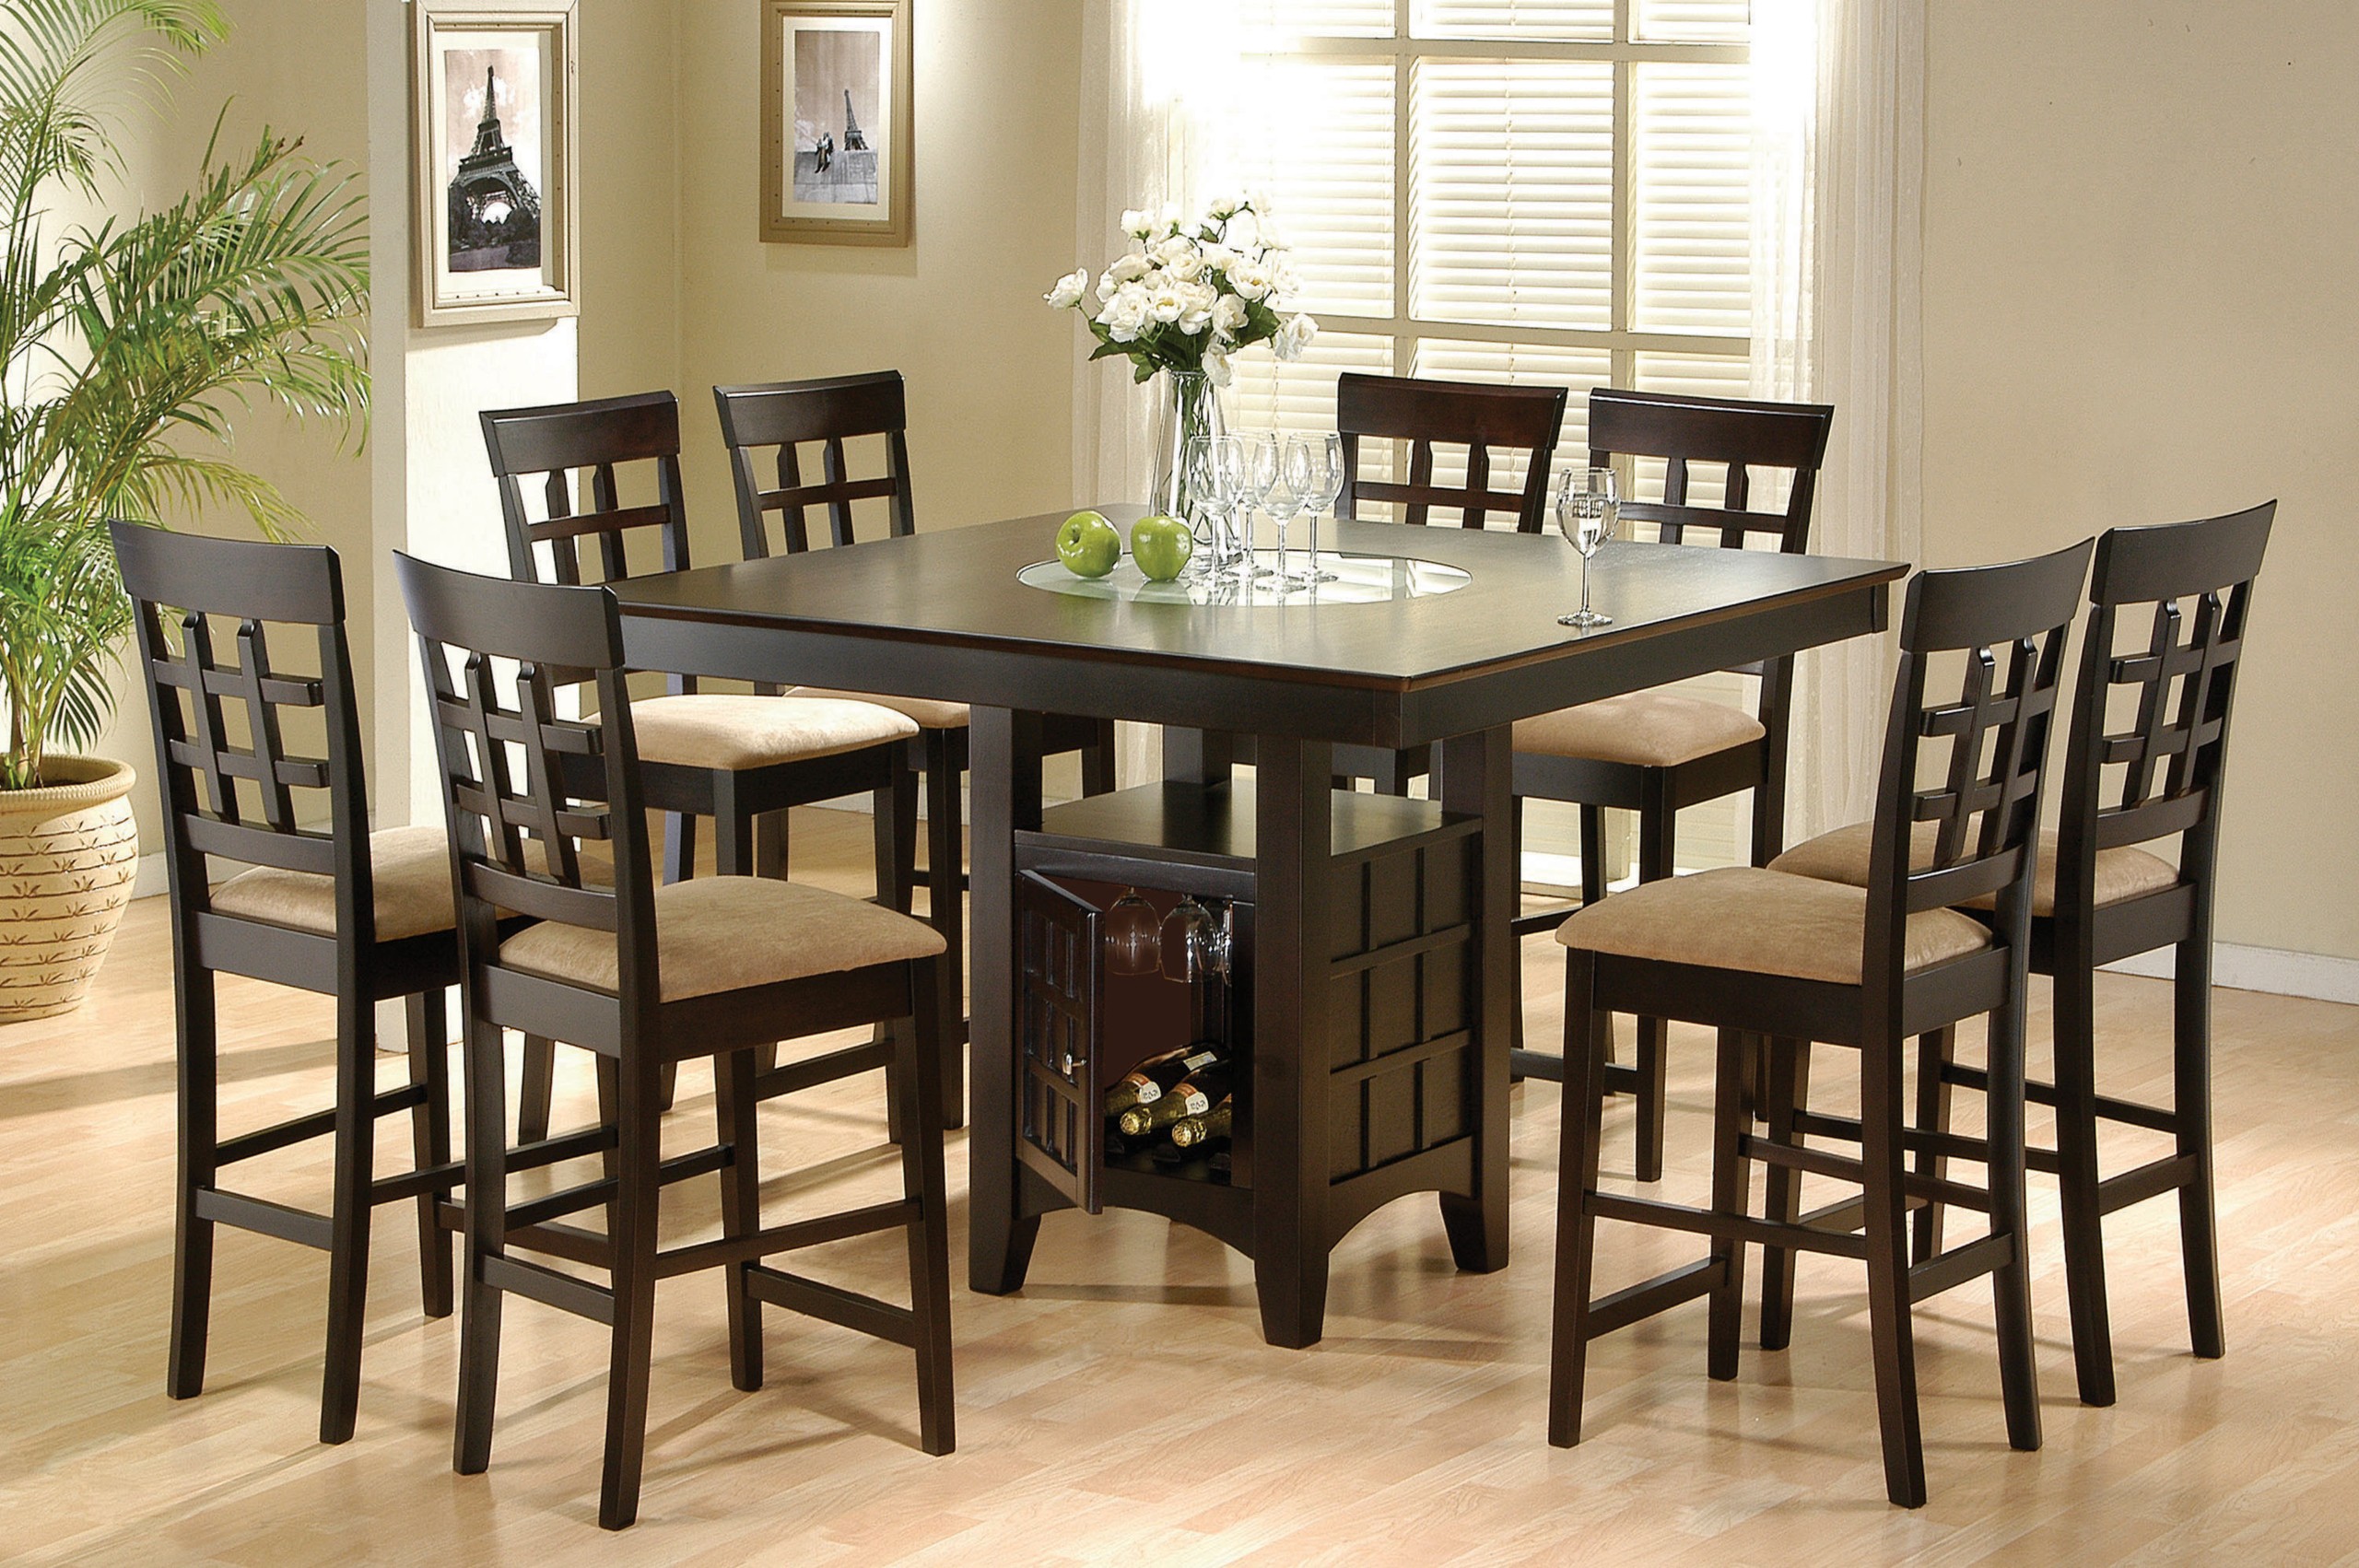 Dining tables image on wooden square dining table set with